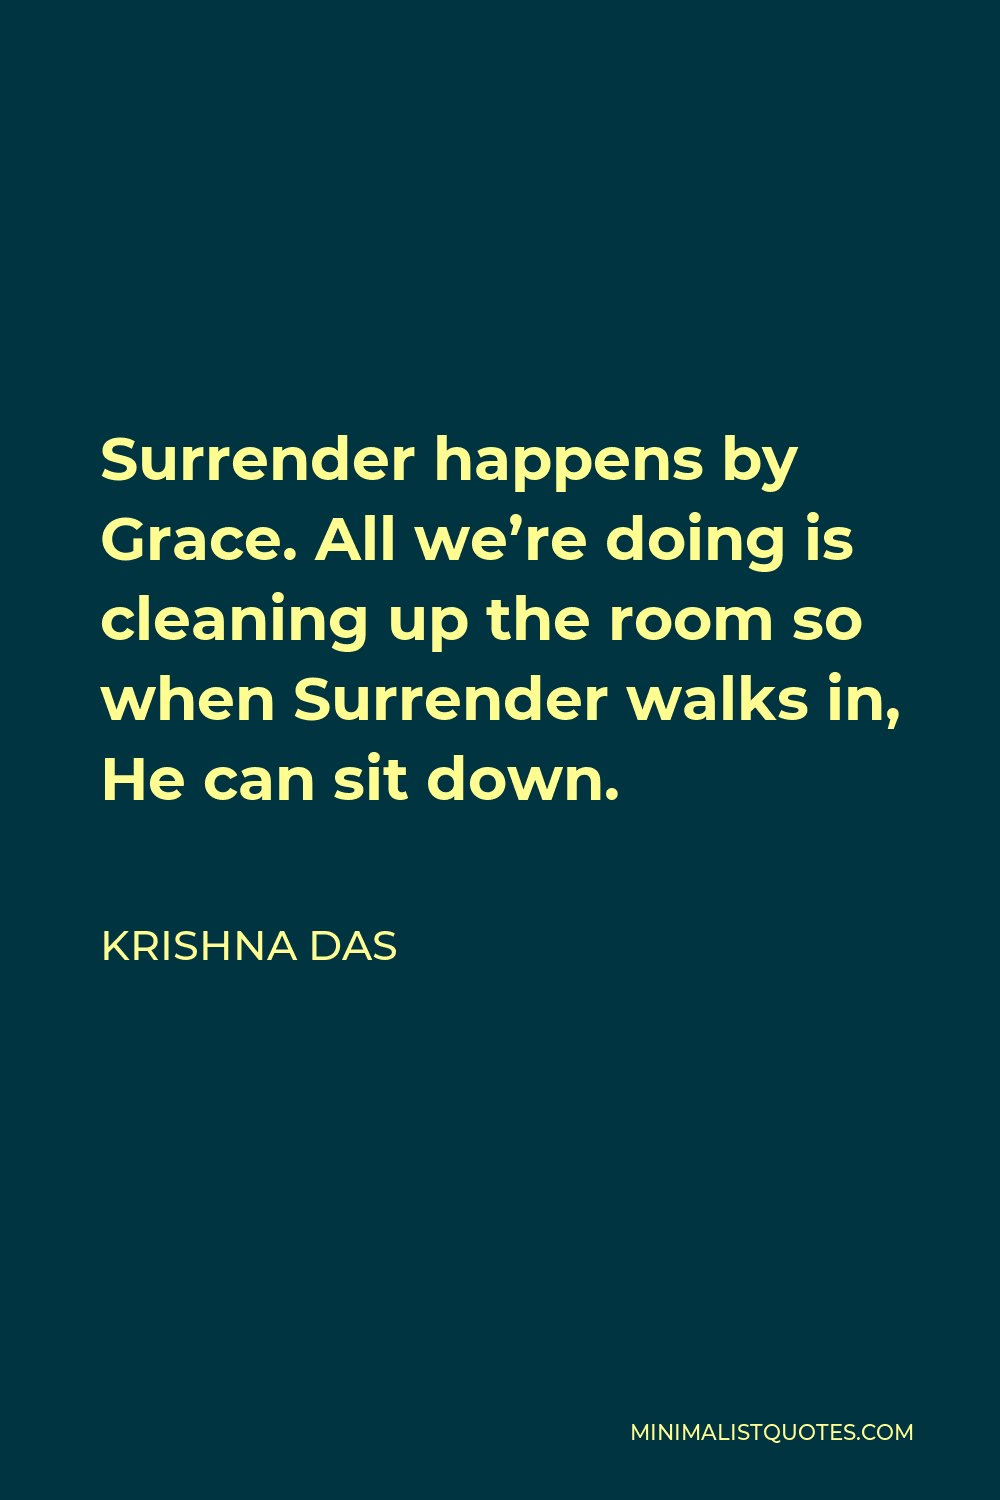 Krishna Das Quote - Surrender happens by Grace. All we’re doing is cleaning up the room so when Surrender walks in, He can sit down.